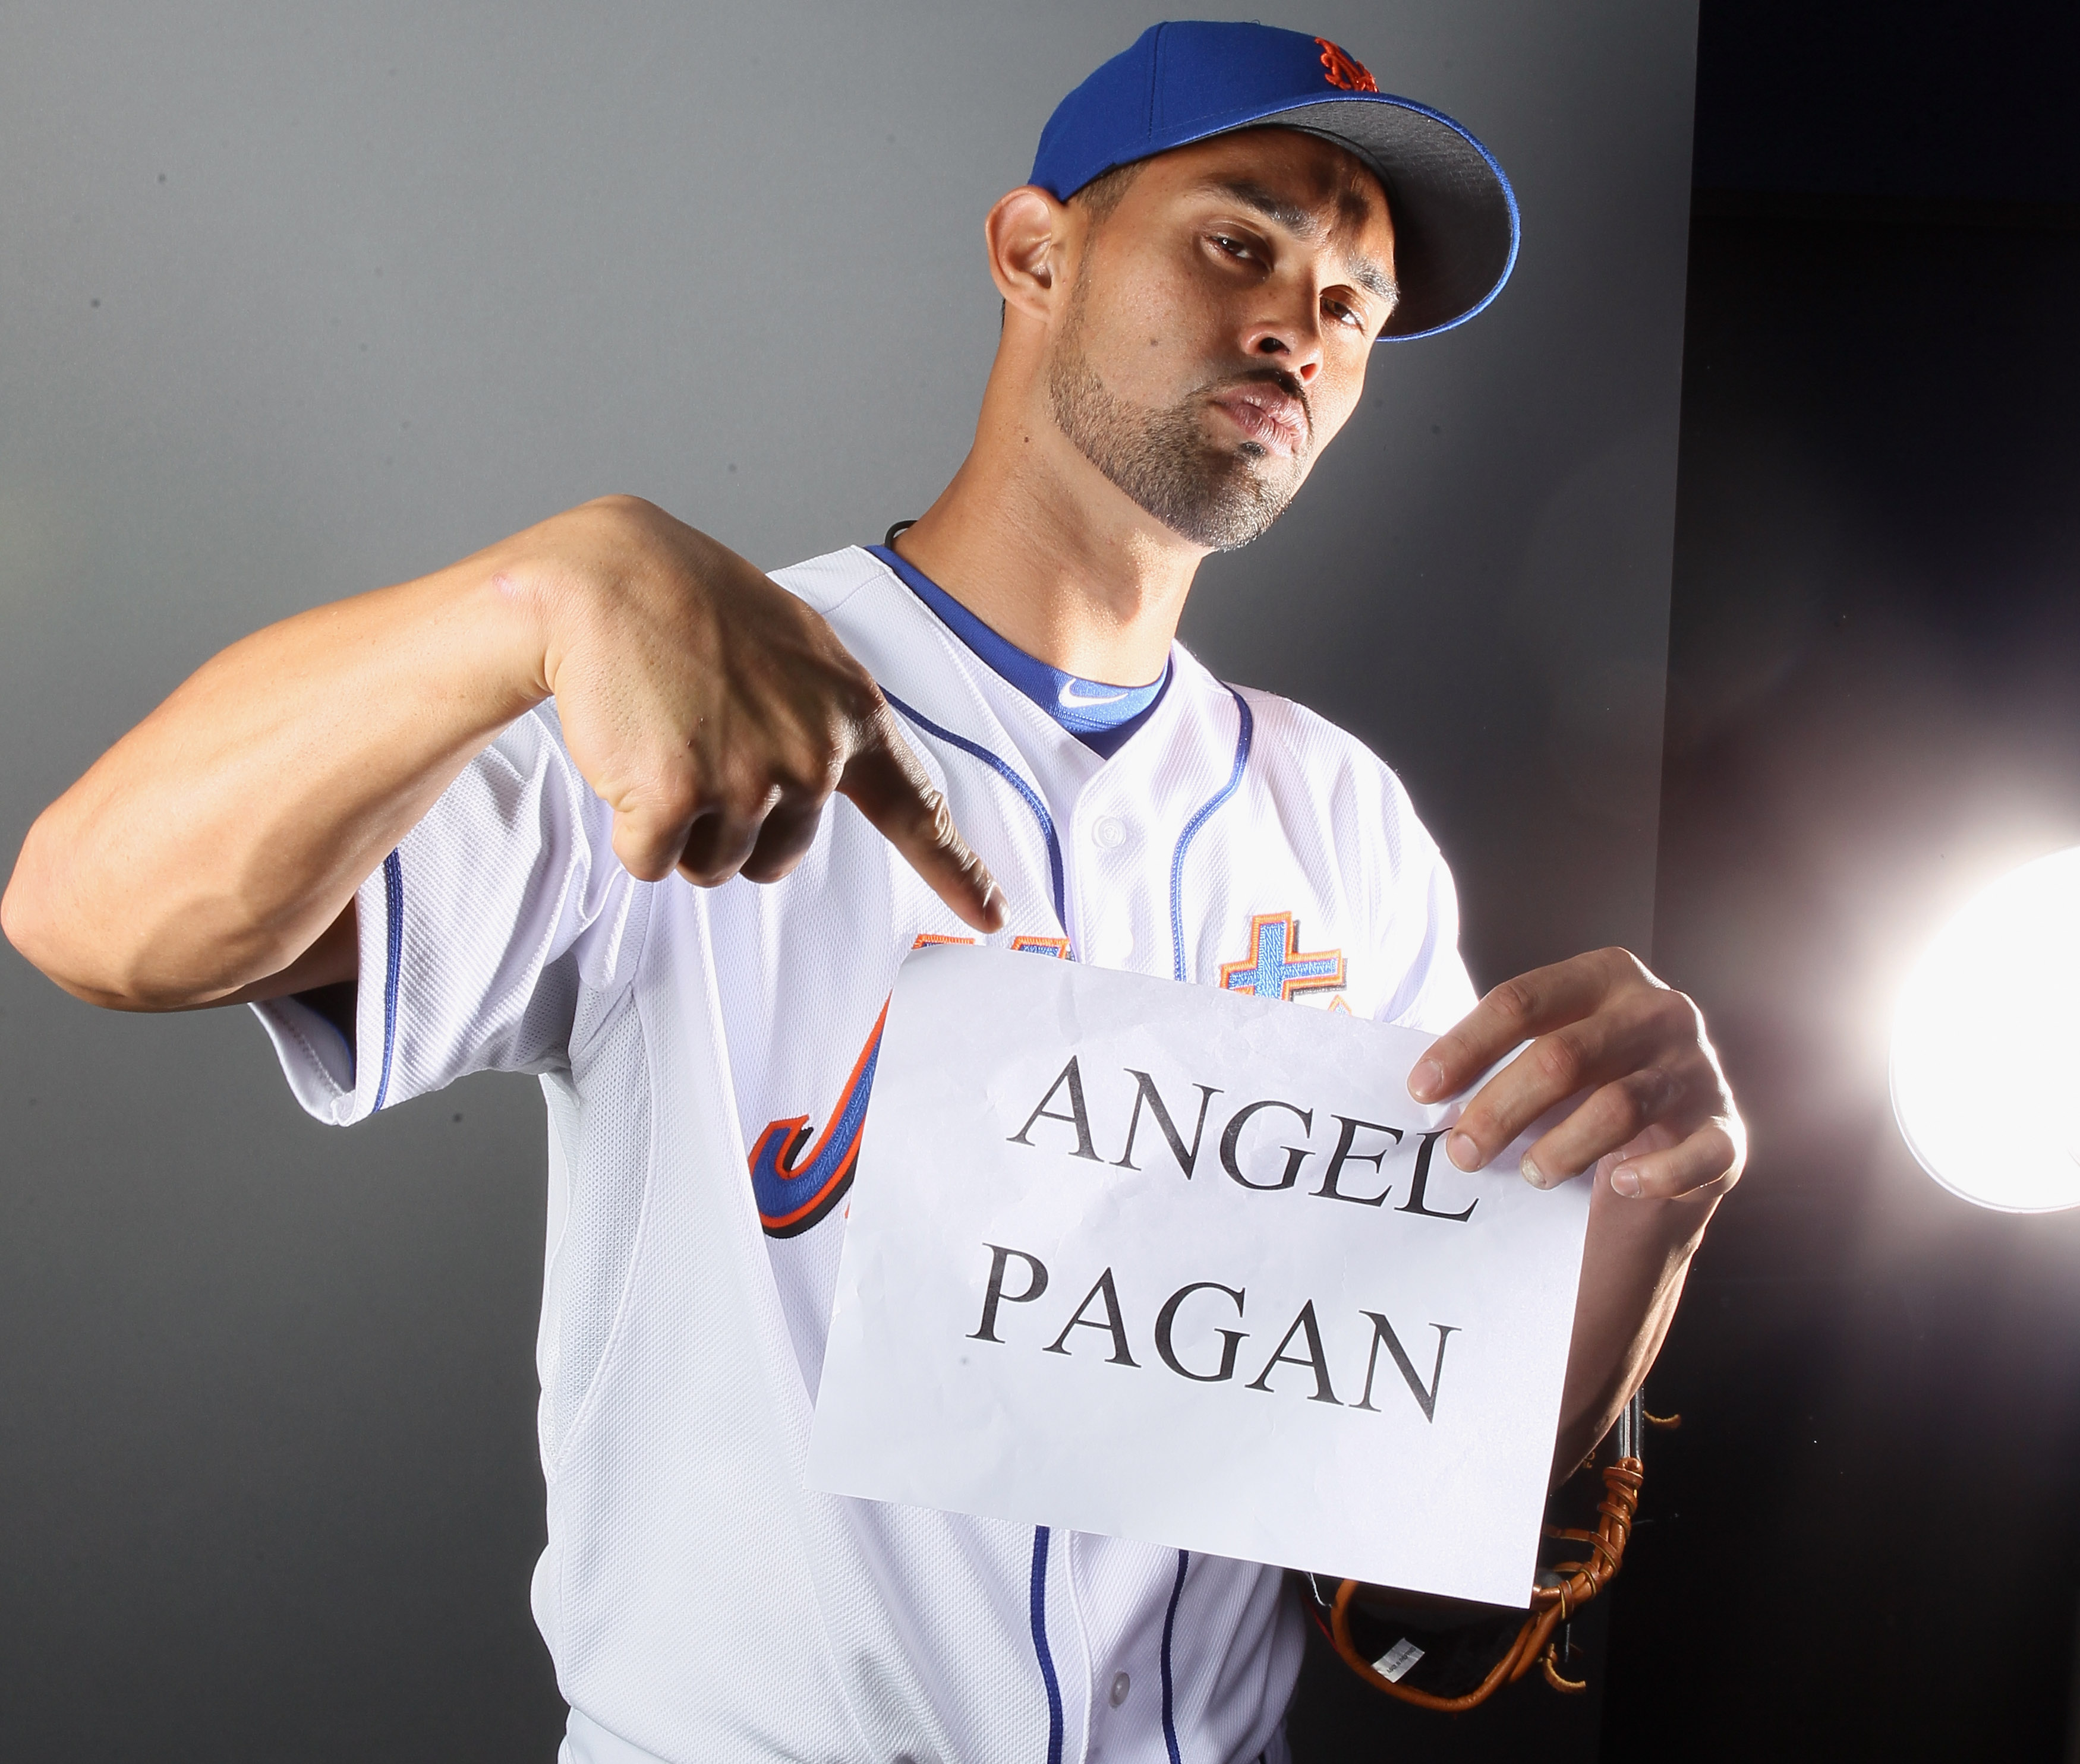 PORT ST. LUCIE, FL - FEBRUARY 24:  RY 24:  RY 24:  RY 24:  RY 24:  Angel Pagan #16 of the New York Mets poses for a portrait during the New York Mets Photo Day on February 24, 2011 at Digital Domain Park in Port St. Lucie, Florida.  (Photo by Elsa/Getty I